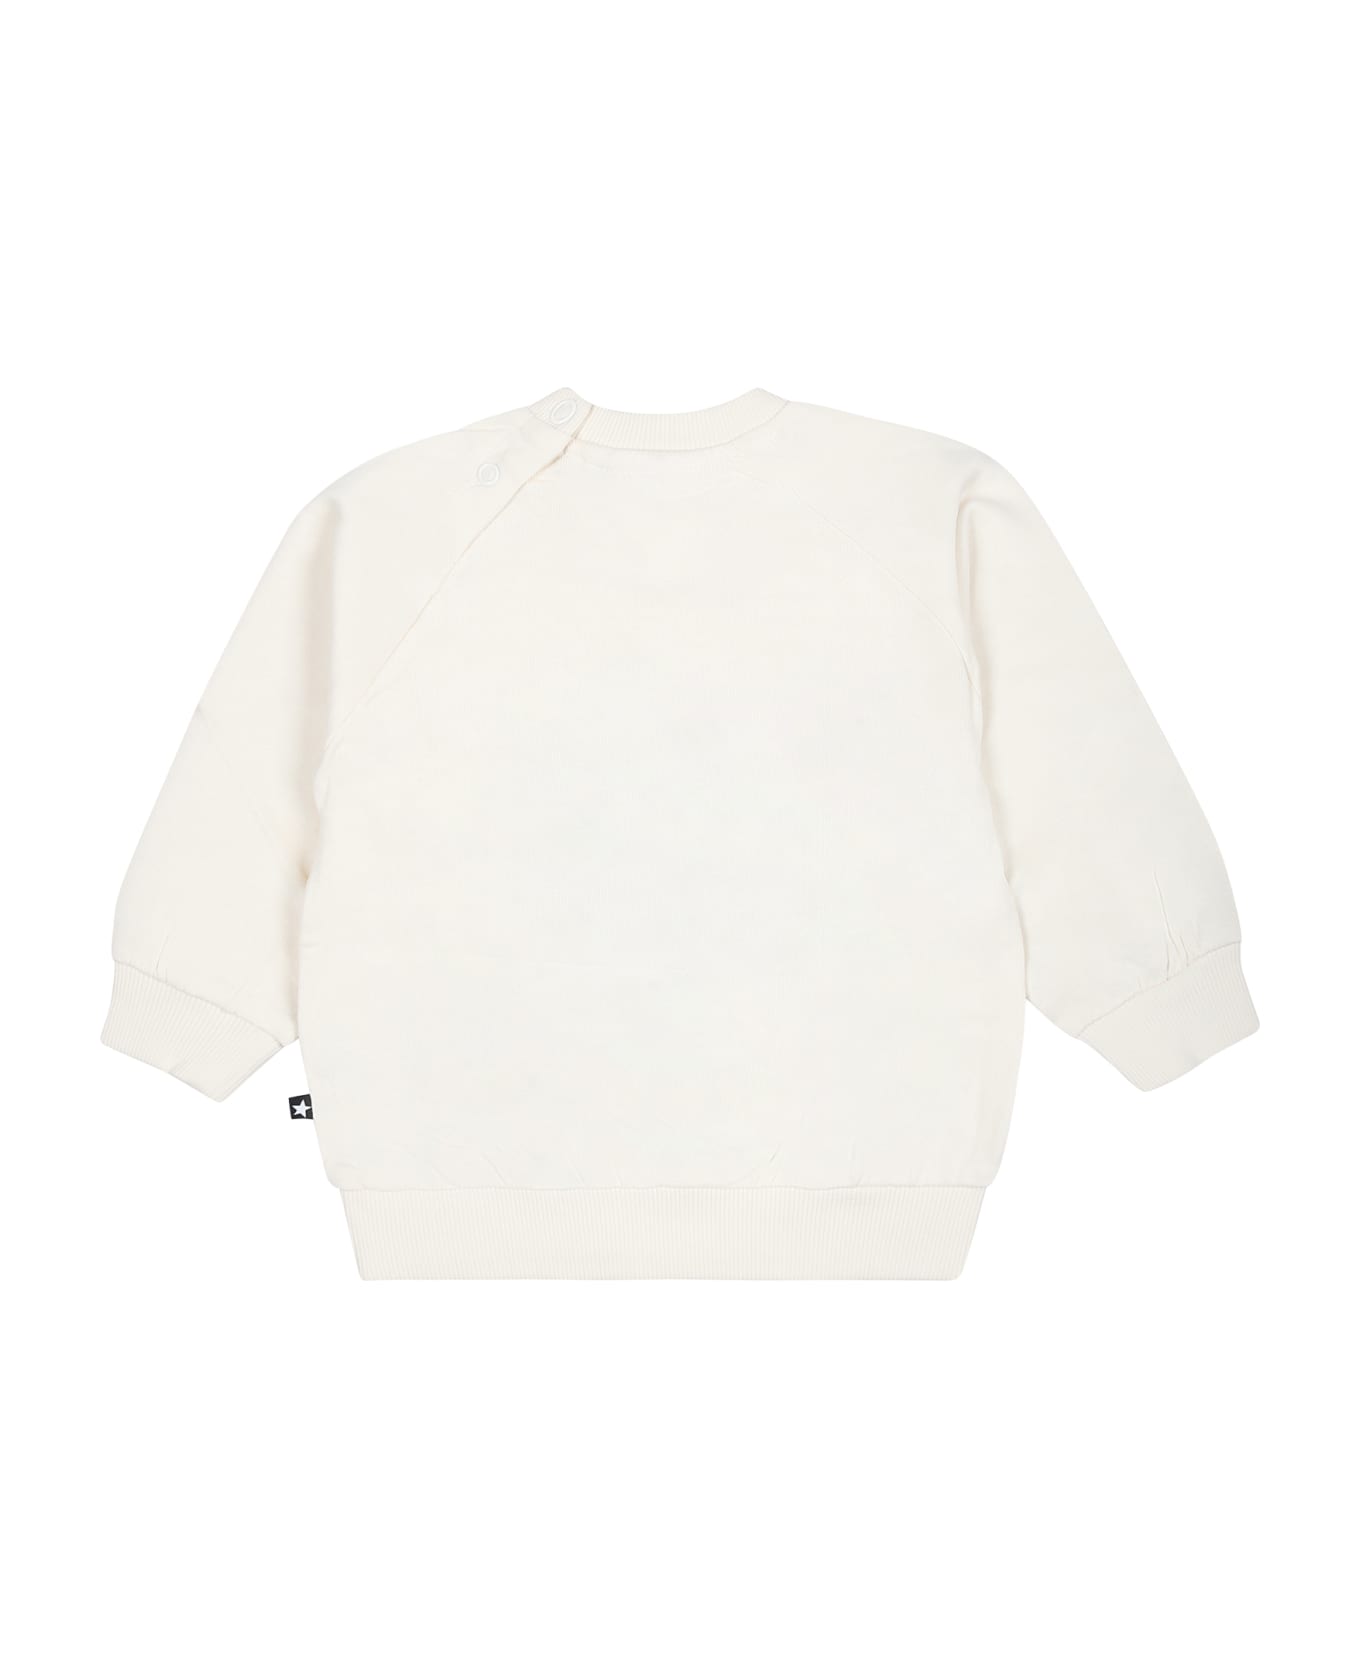 Molo White Sweatshirt For Baby Kids With Heart. - White